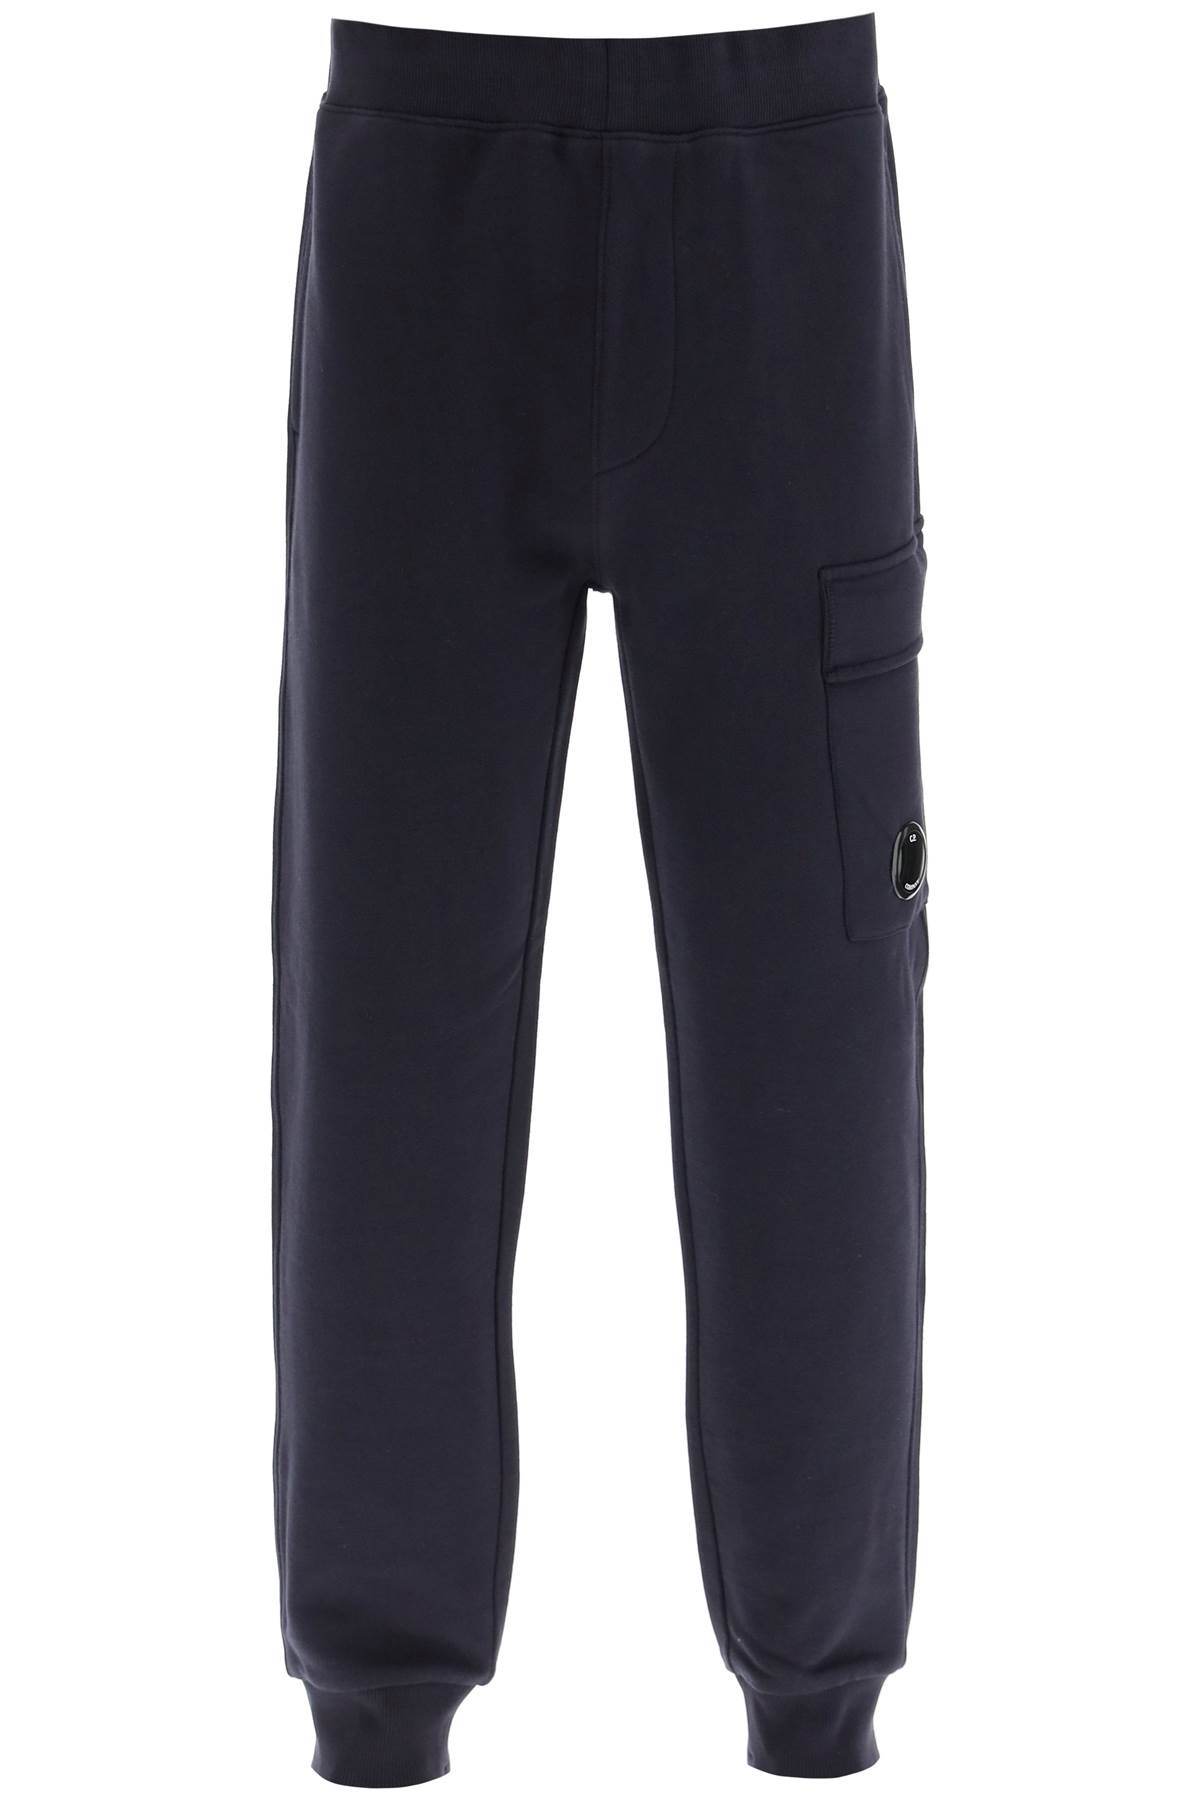 C.P. Company Sweatpants With Cp Lens Cargo Pocket